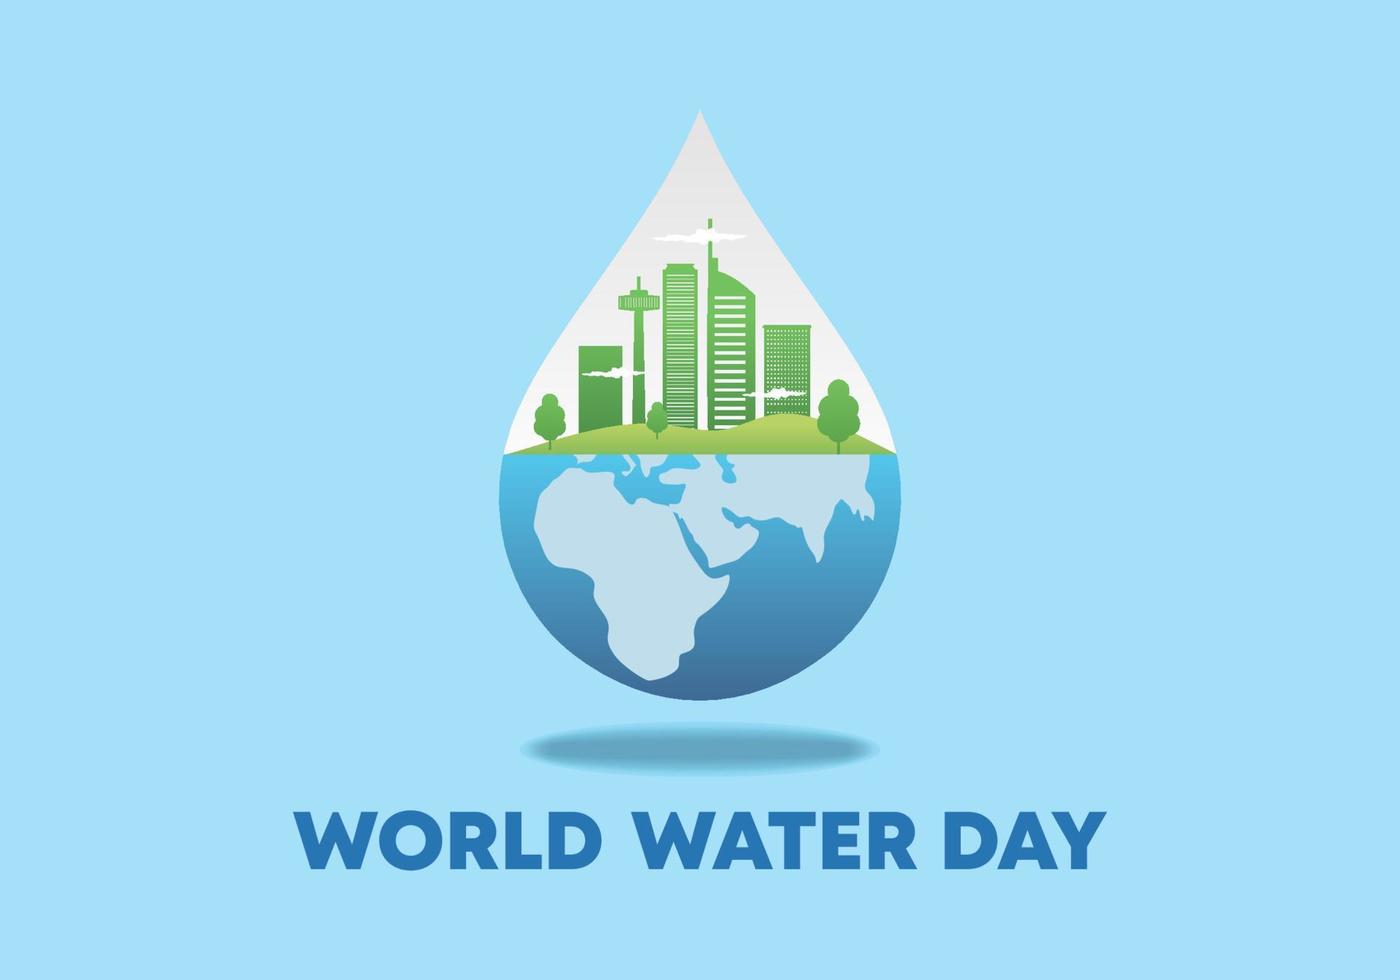 World water day background with cityscape landmark and world ma vector